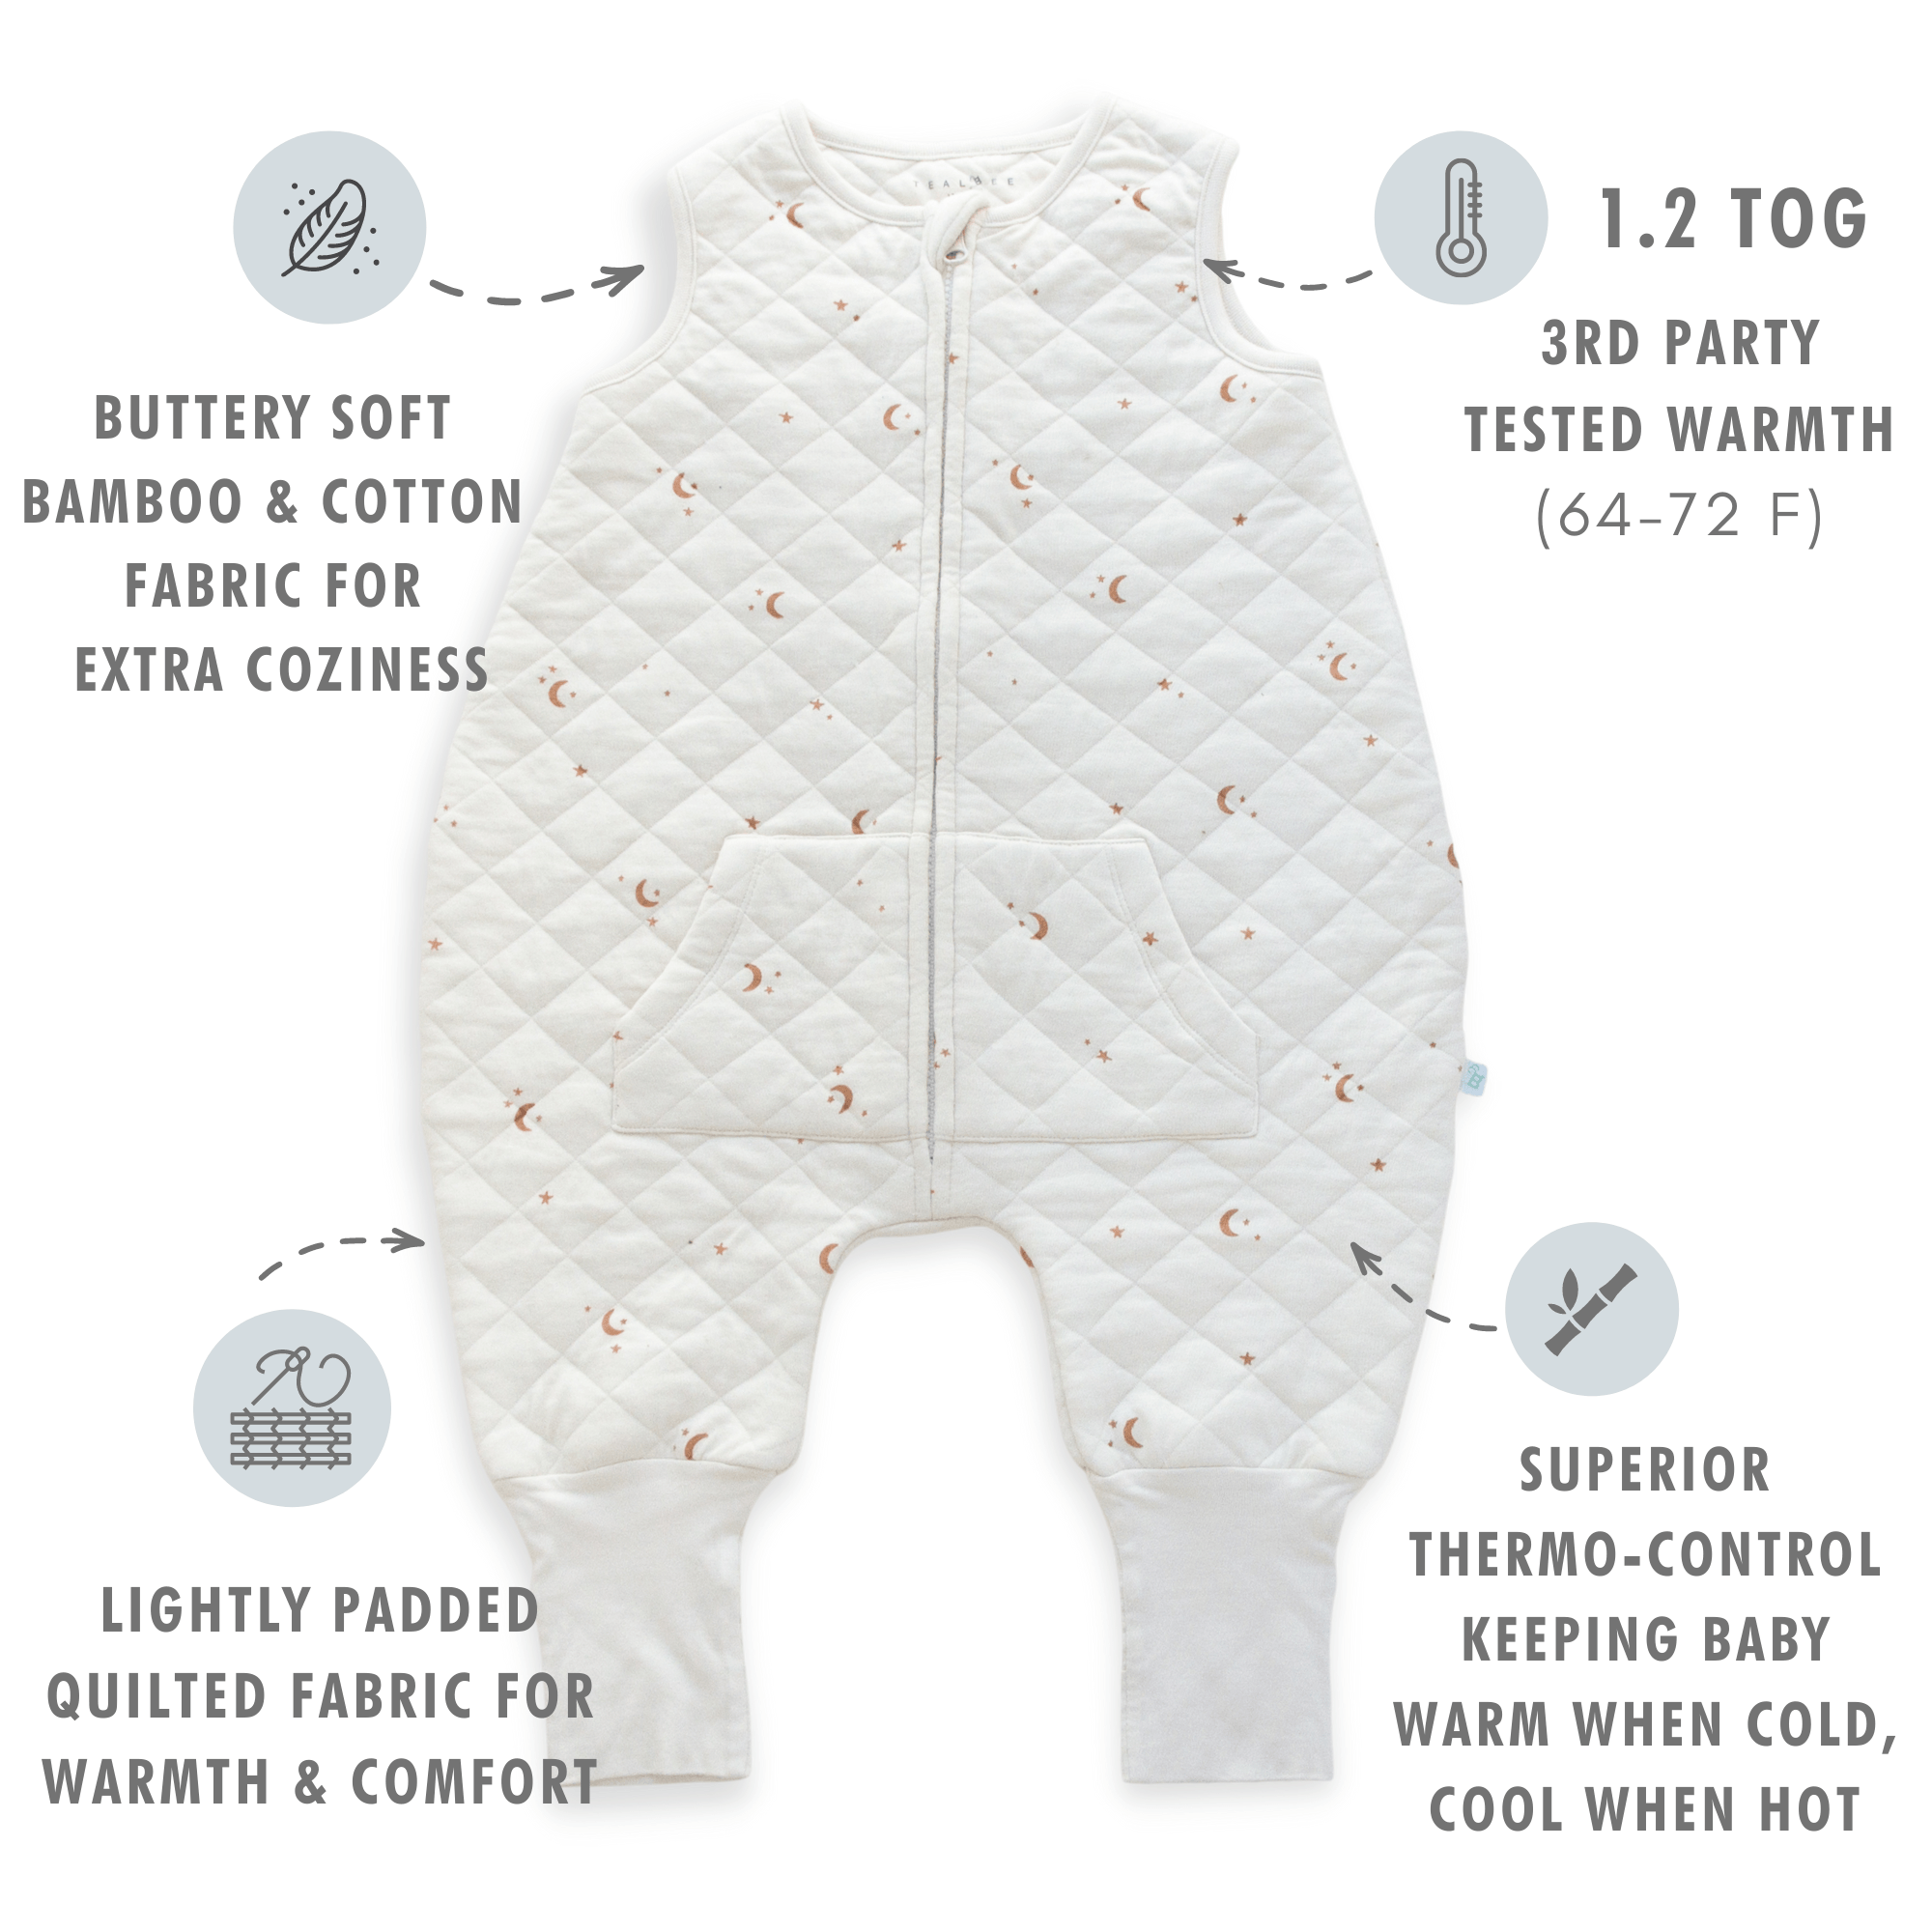 Tealbee Moon & Stars Dreamsuit Sleep Sack - buttery soft bamboo and cotton fabric for extra coziness, 1.2 TOG 3rd party tested warmth, lightly padded quilted fabric for warmth and comfort, superior thermo-control keeping baby warm when cold and cool when hot.